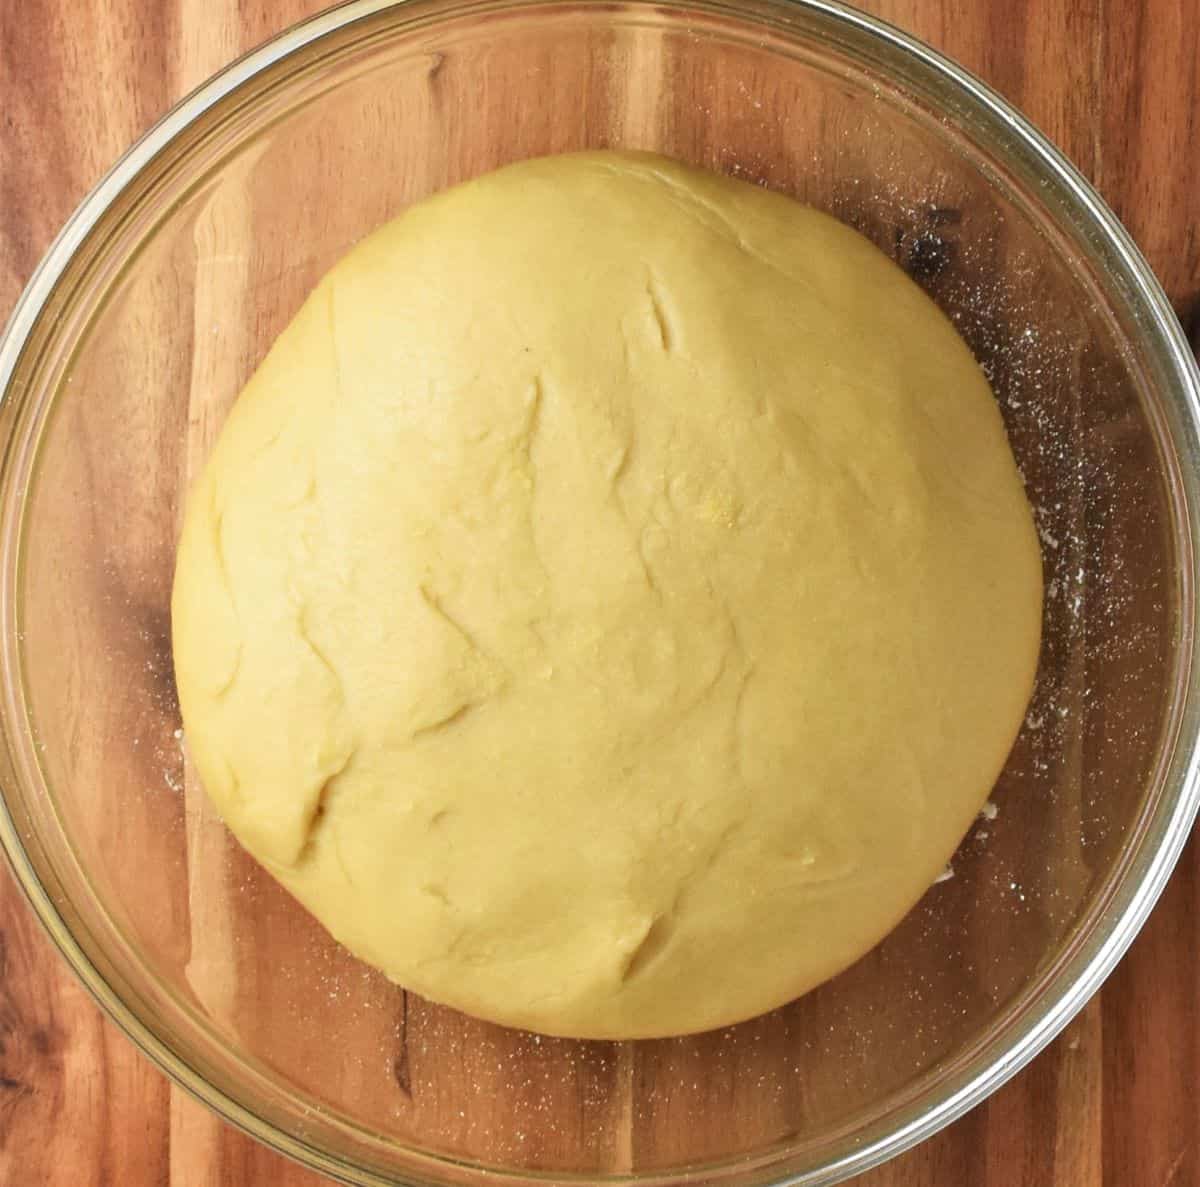 Proofed dough for cake in glass bowl.